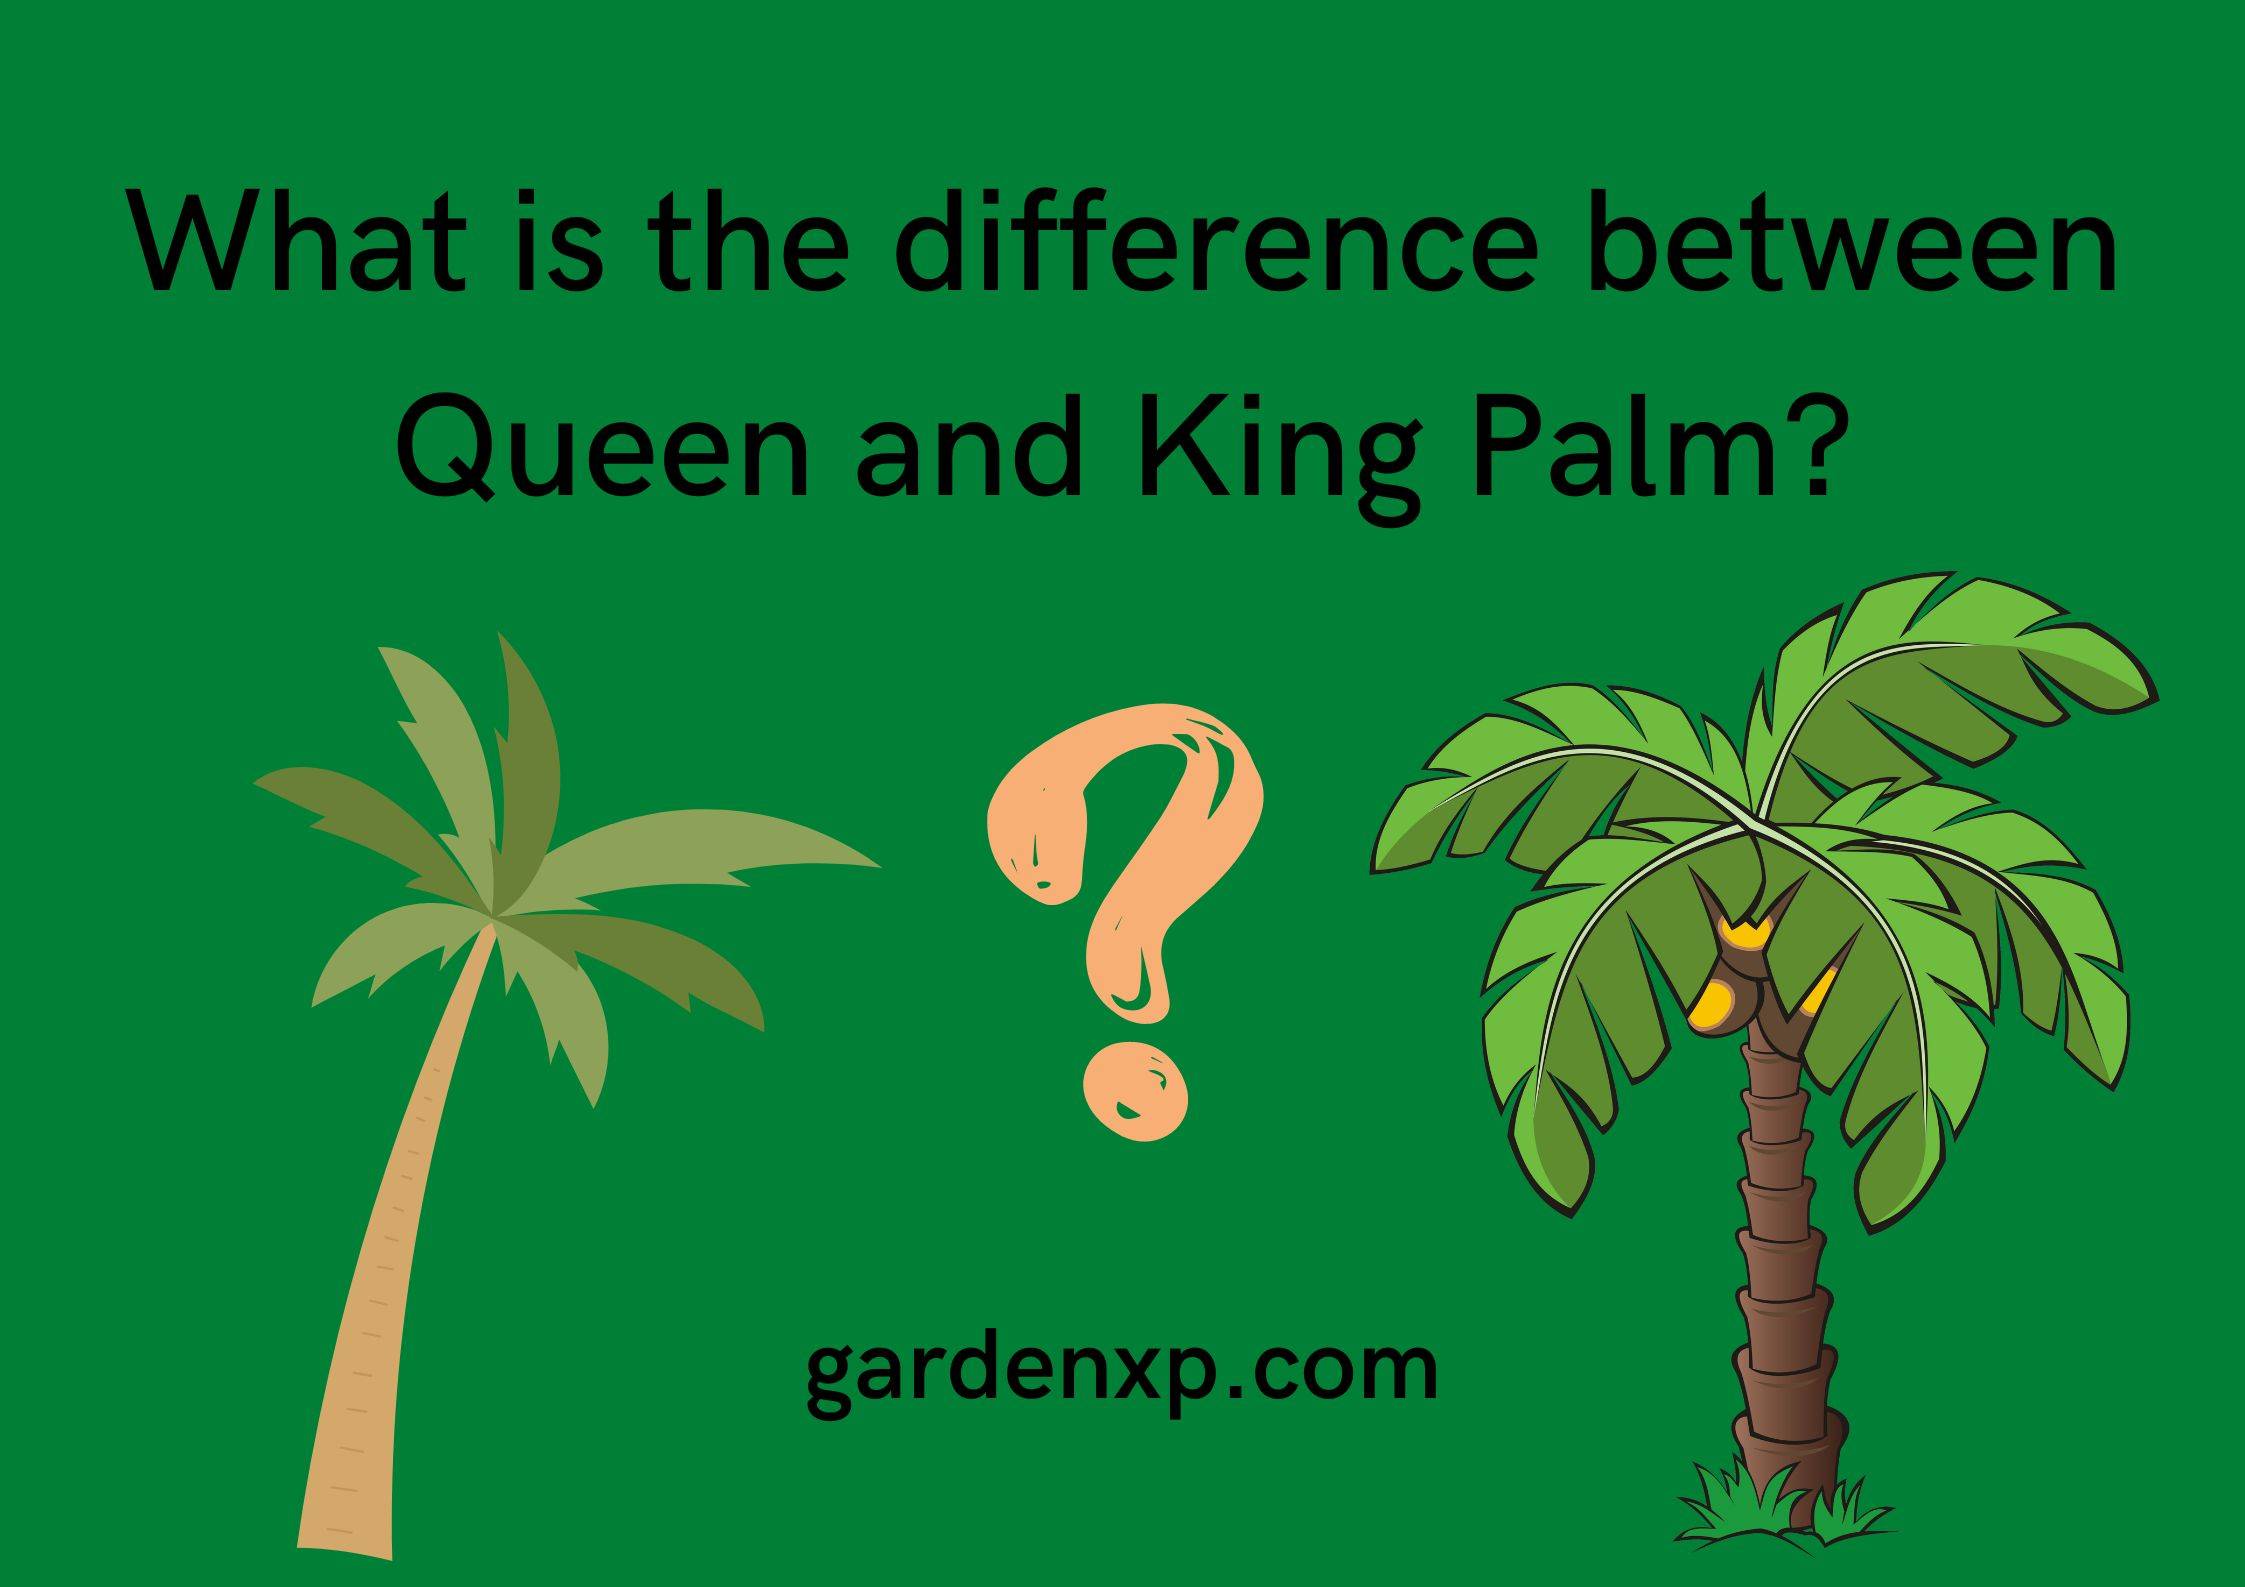 What is the difference between Queen and King Palm?